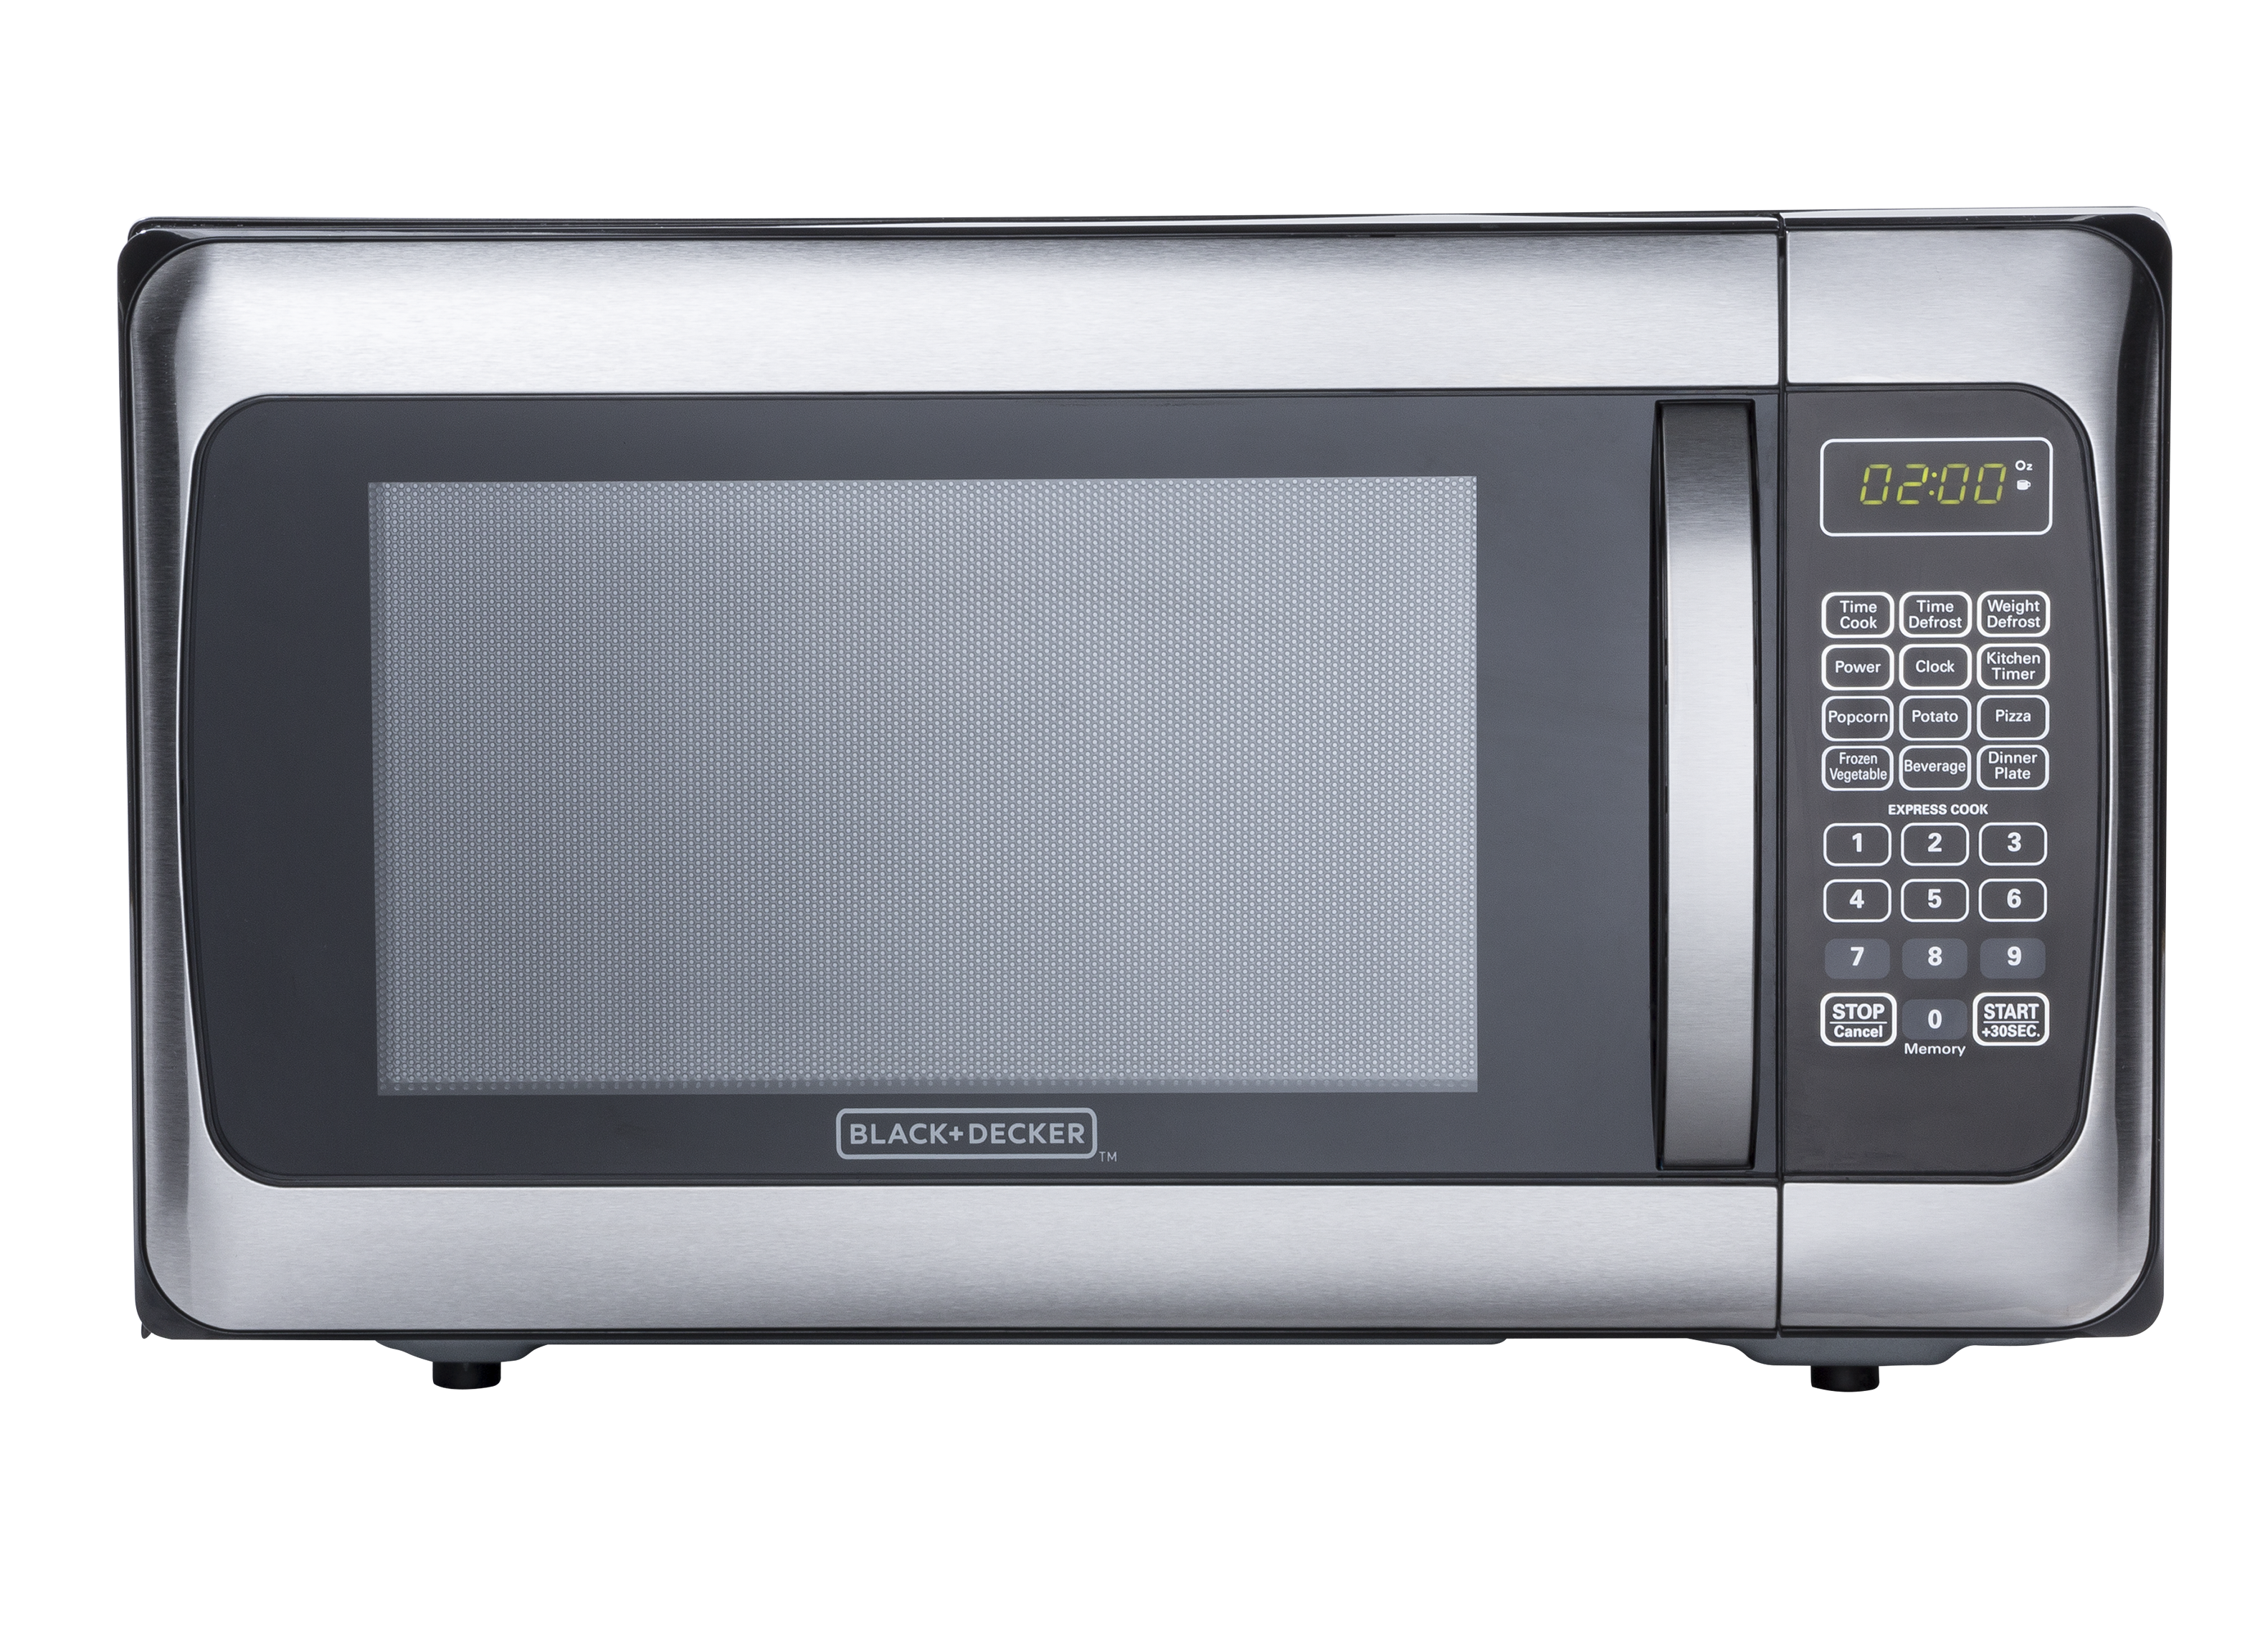 https://crdms.images.consumerreports.org/prod/products/cr/models/389292-countertopmicrowaveovens-blackdecker-em031mggx1.png